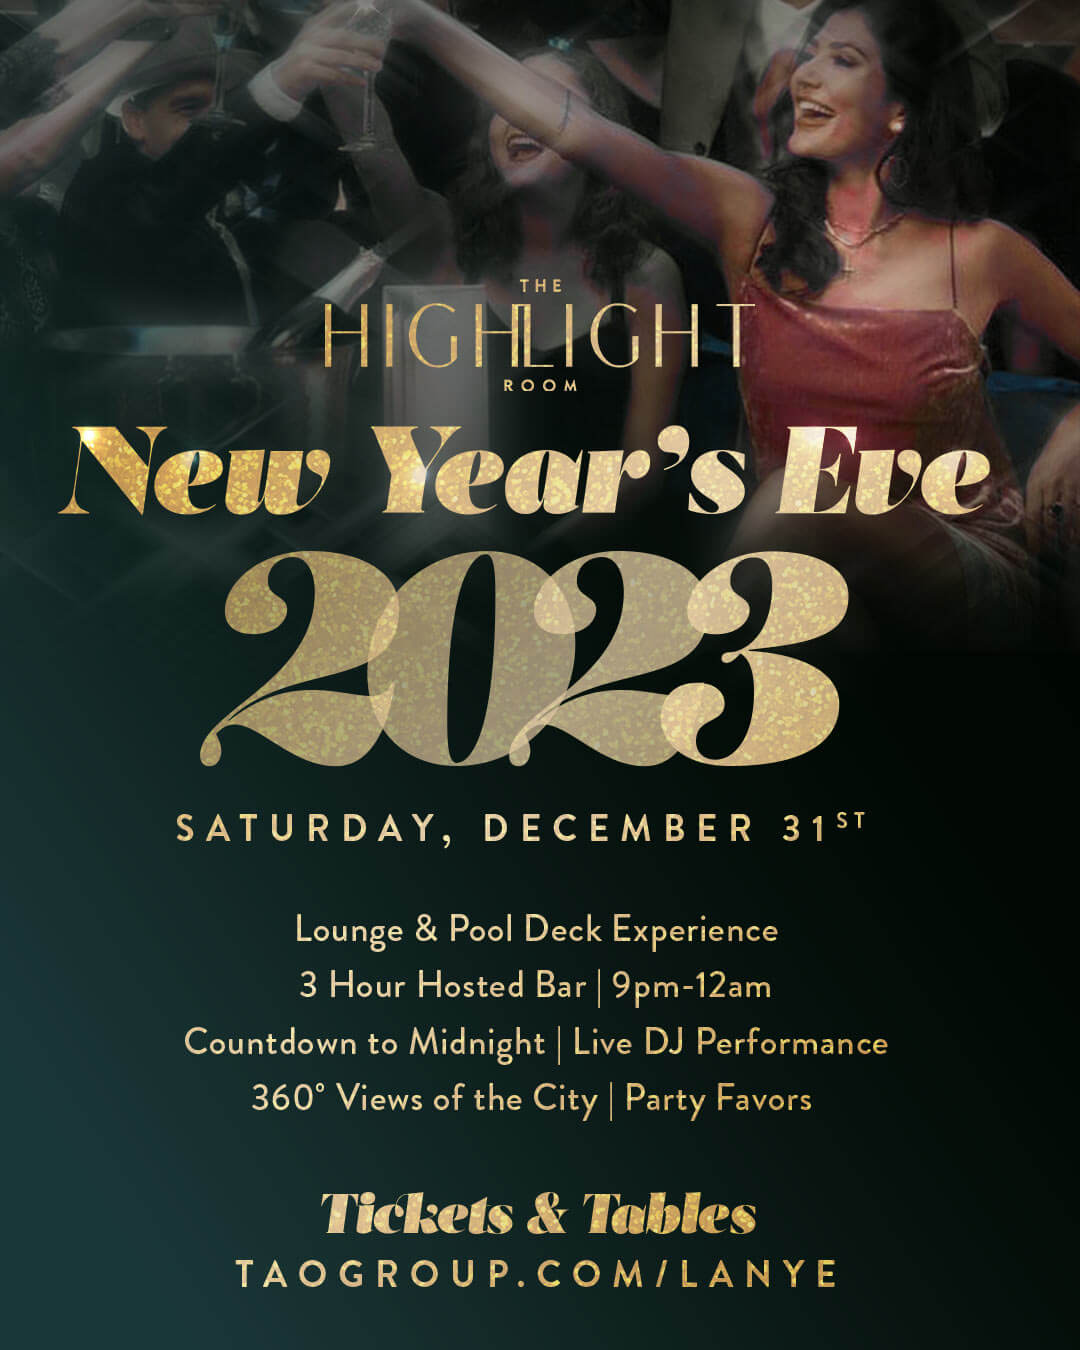 The Highlight Room New Year's Eve